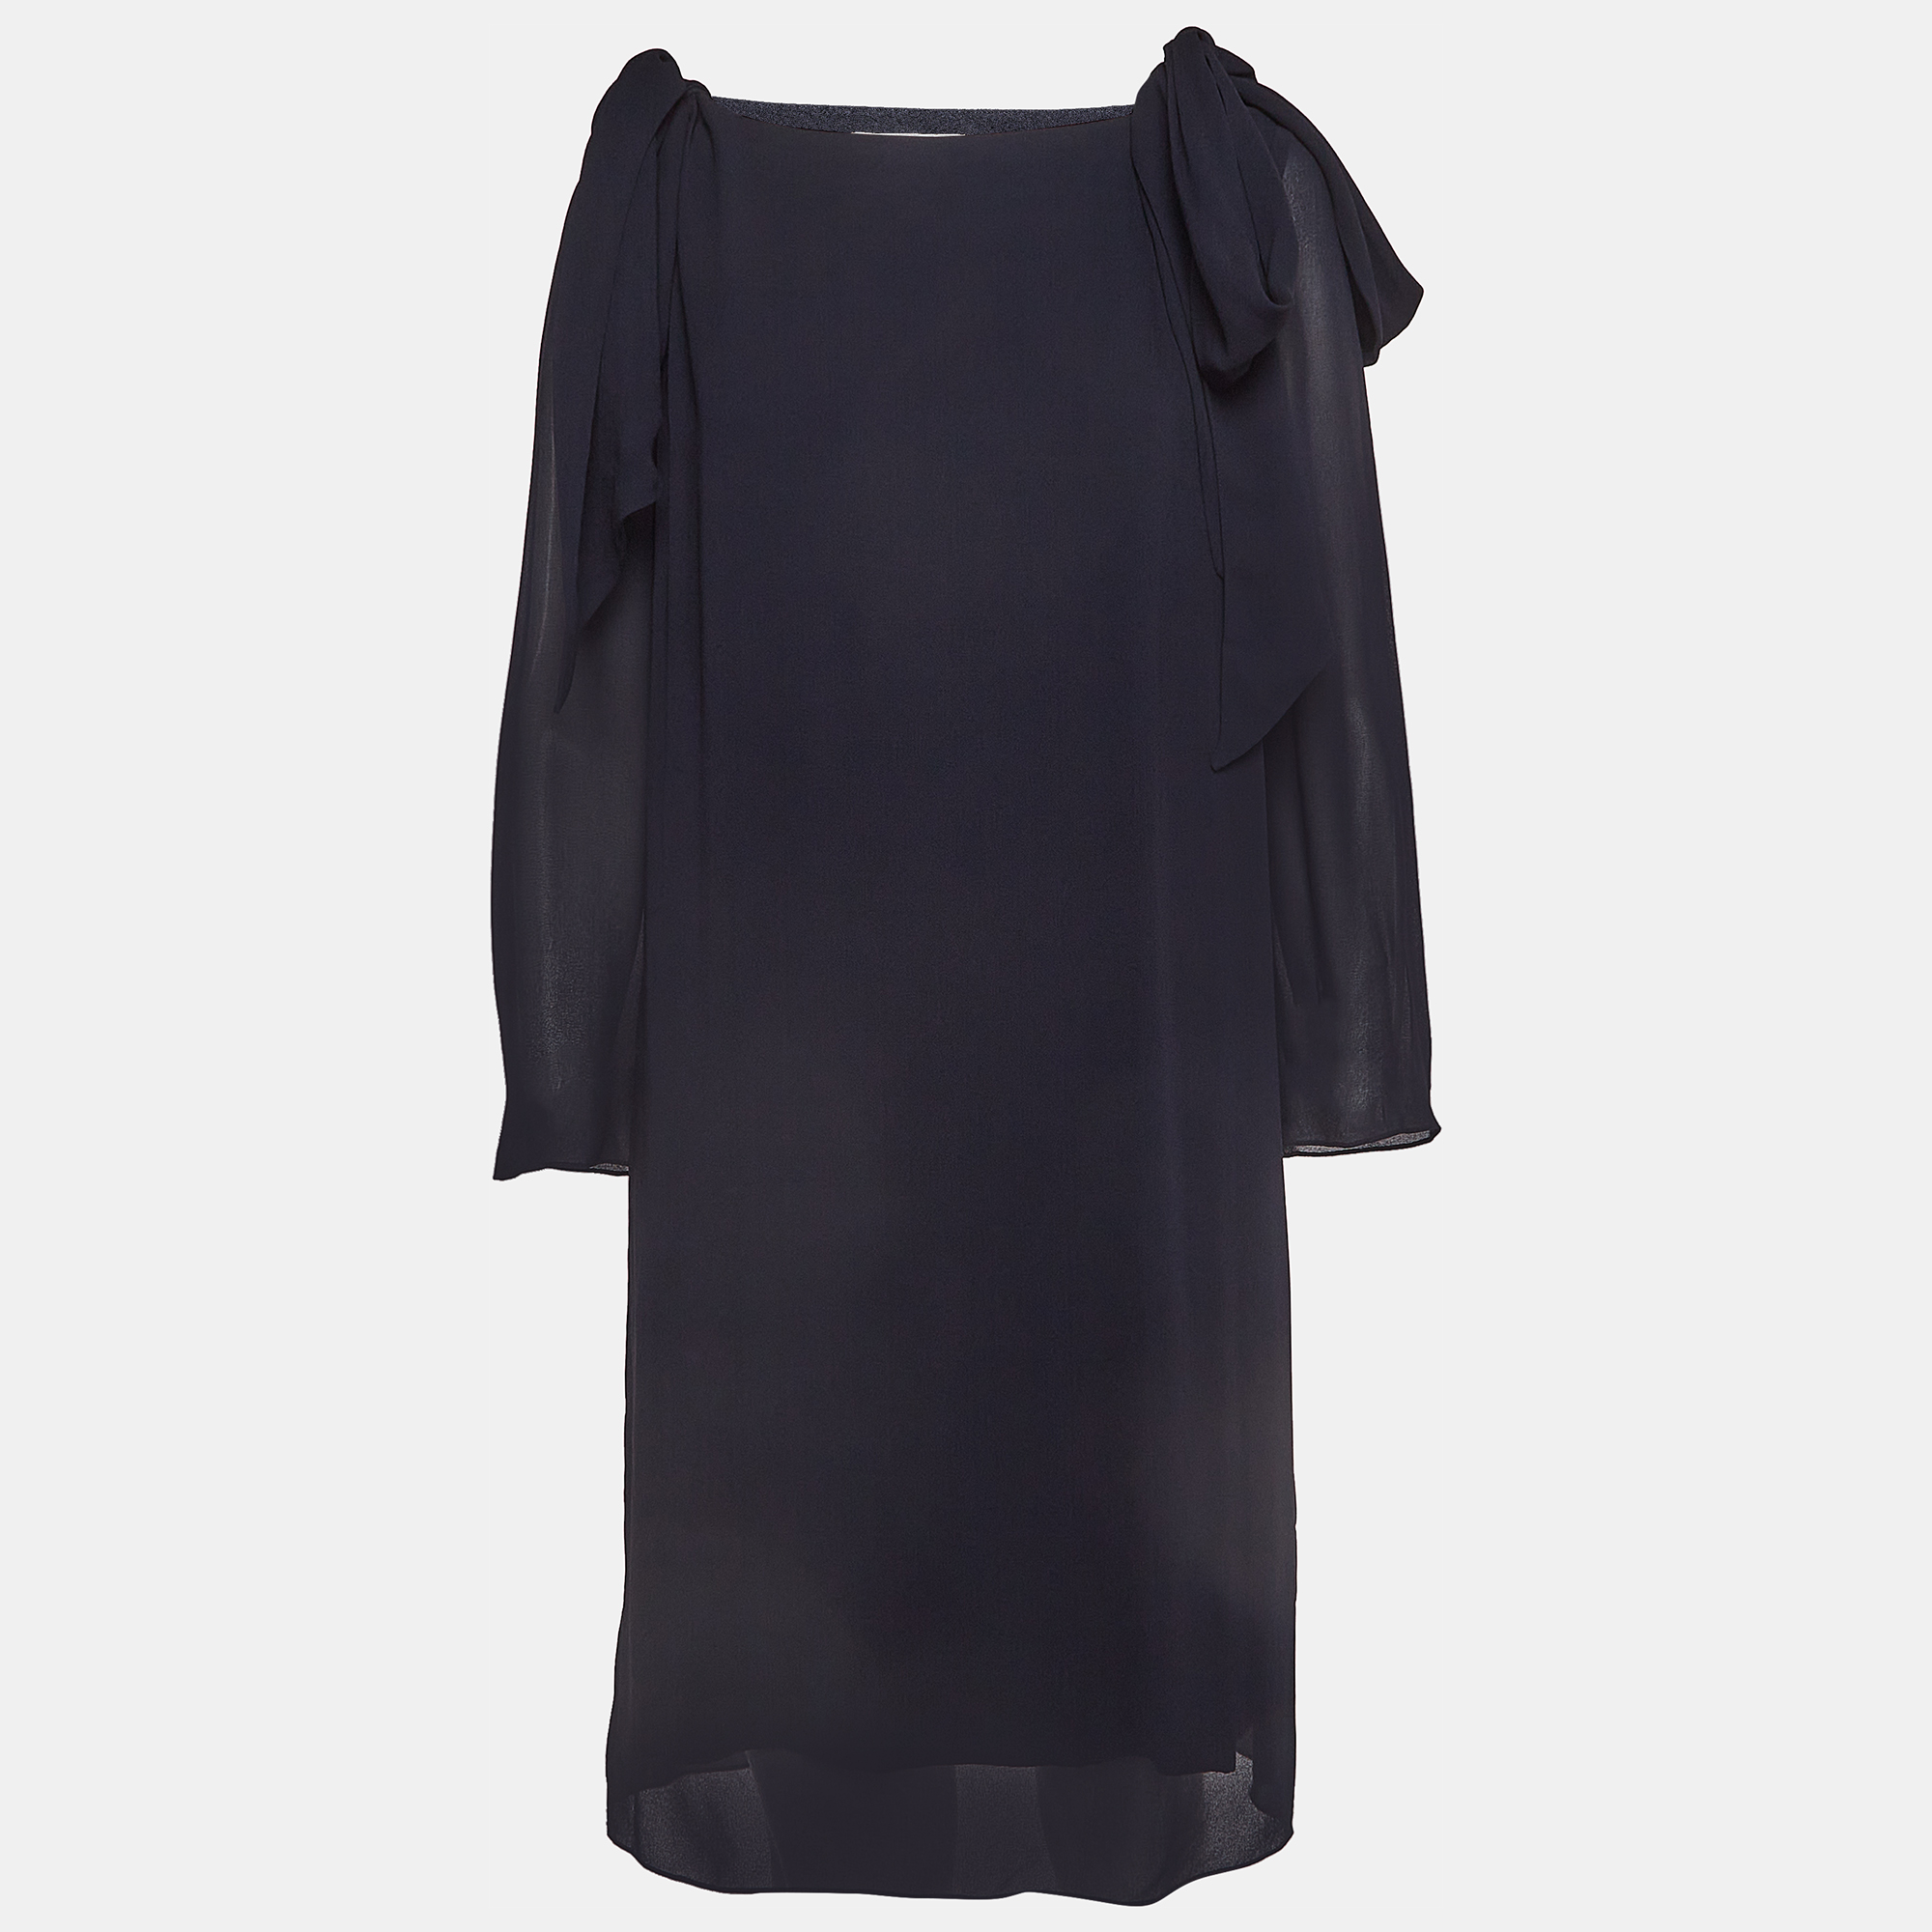 Chloe navy blue crepe tie-up detail anthraci robe dress s